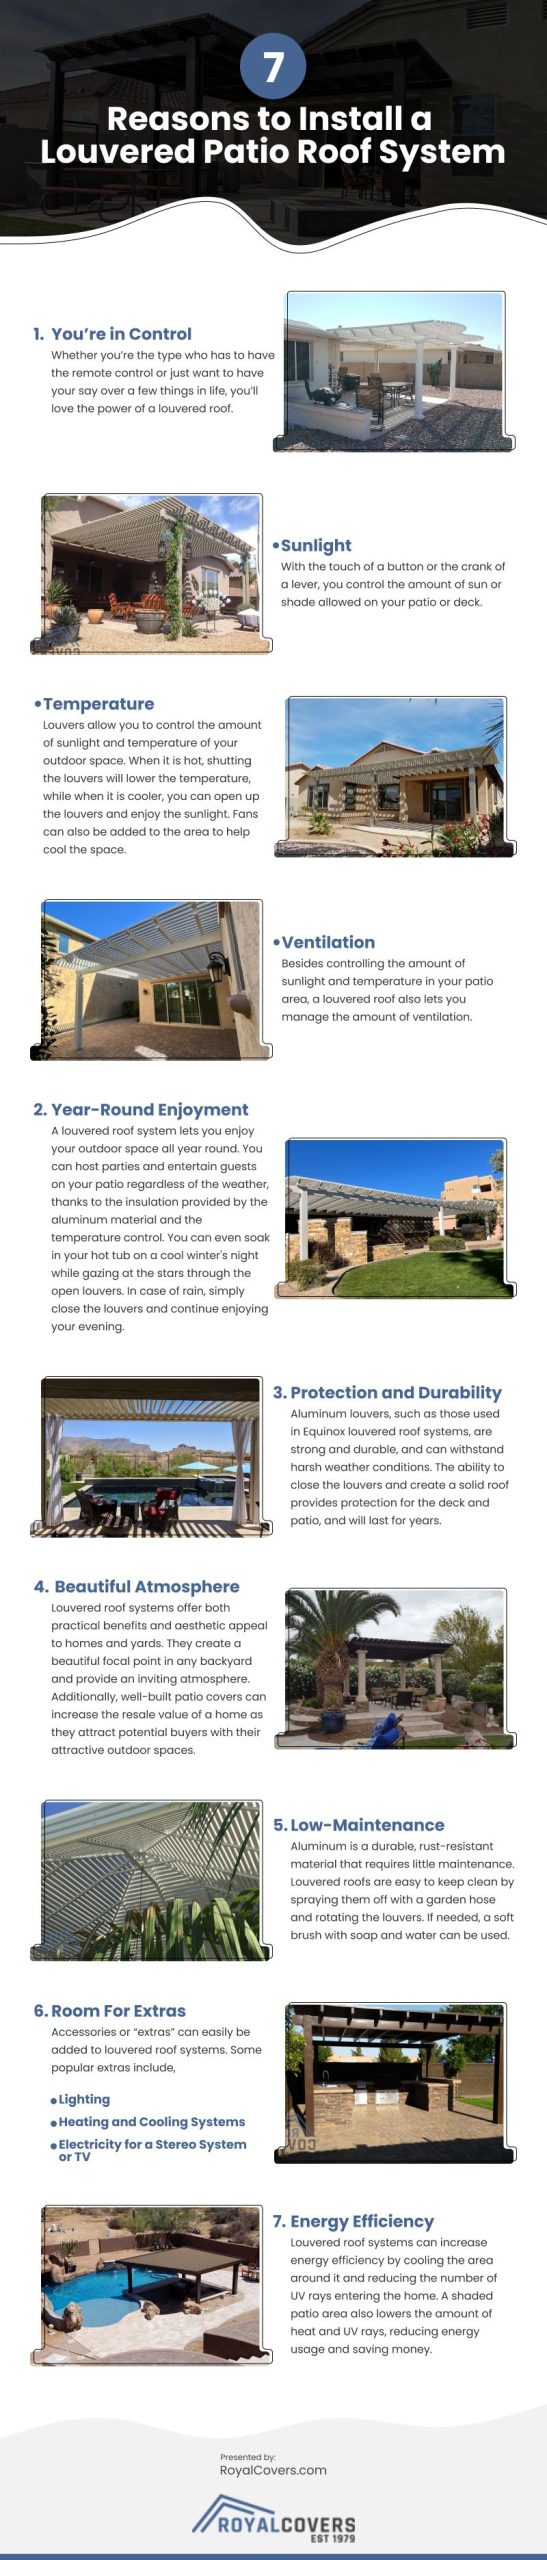 7 Reasons to Install a Louvered Patio Roof System Infographic